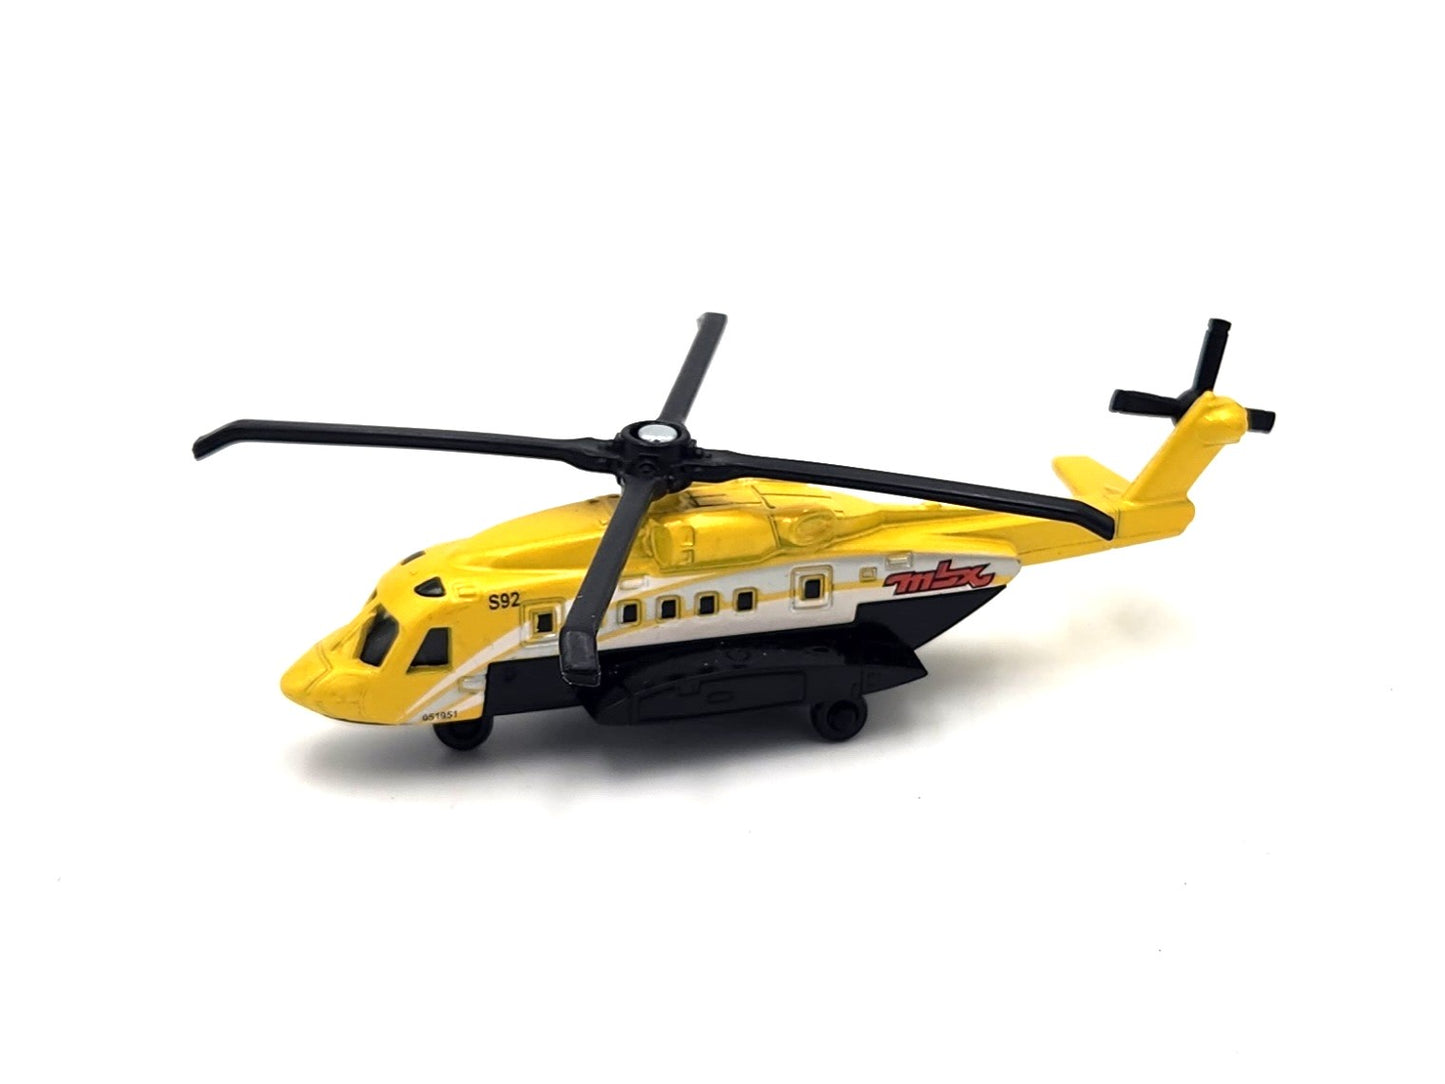 Uncarded - Matchbox - Sikorsky S-92 Yellow Helicopter